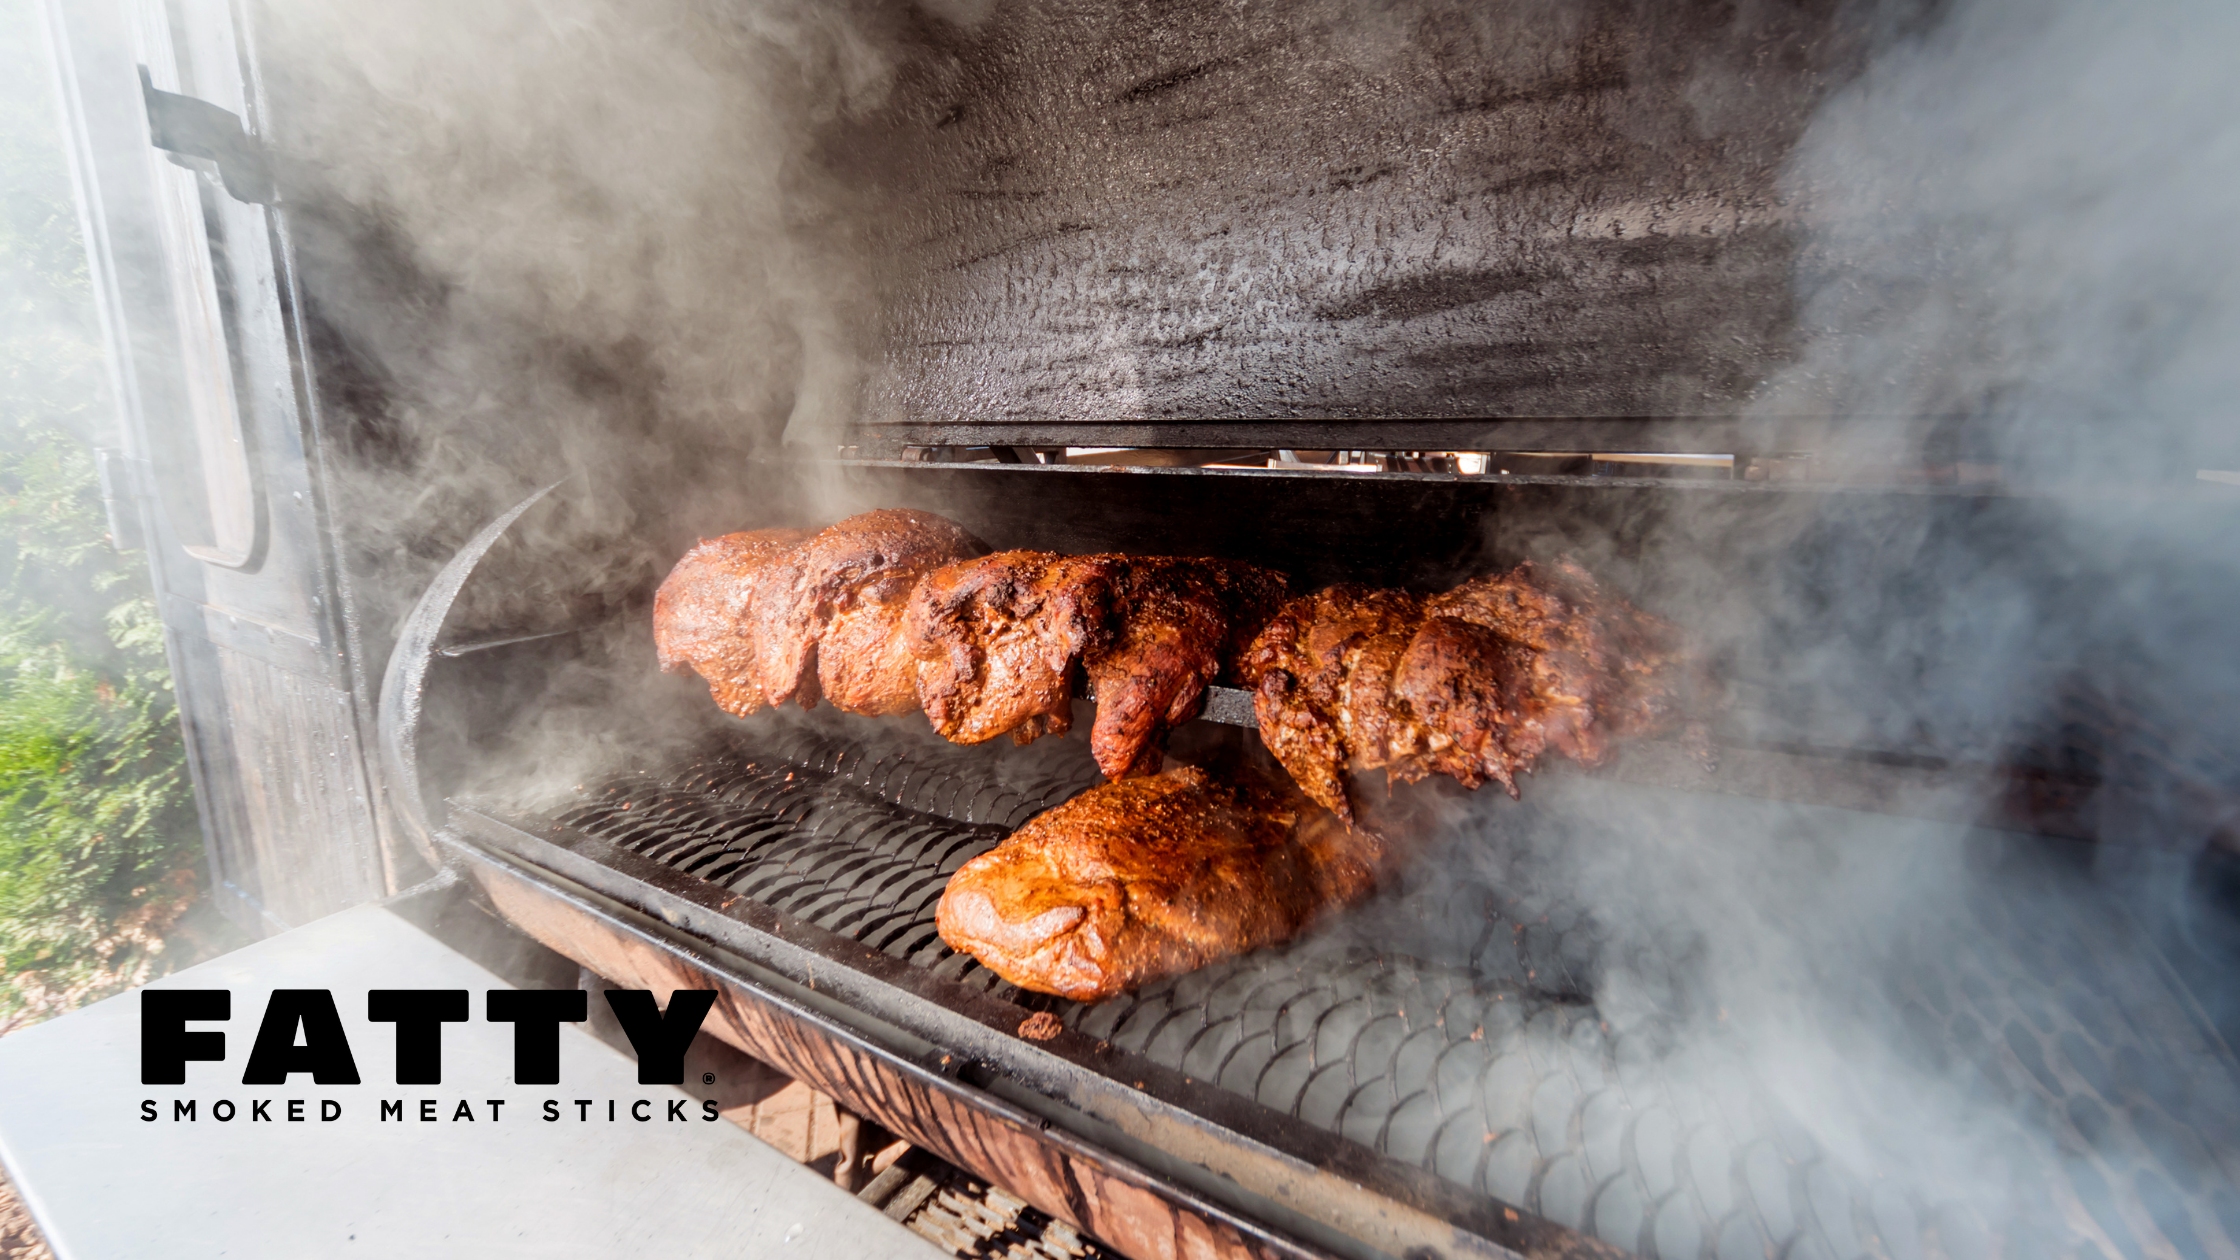 Which Type of Wood Should You Use for Smoking Meat?